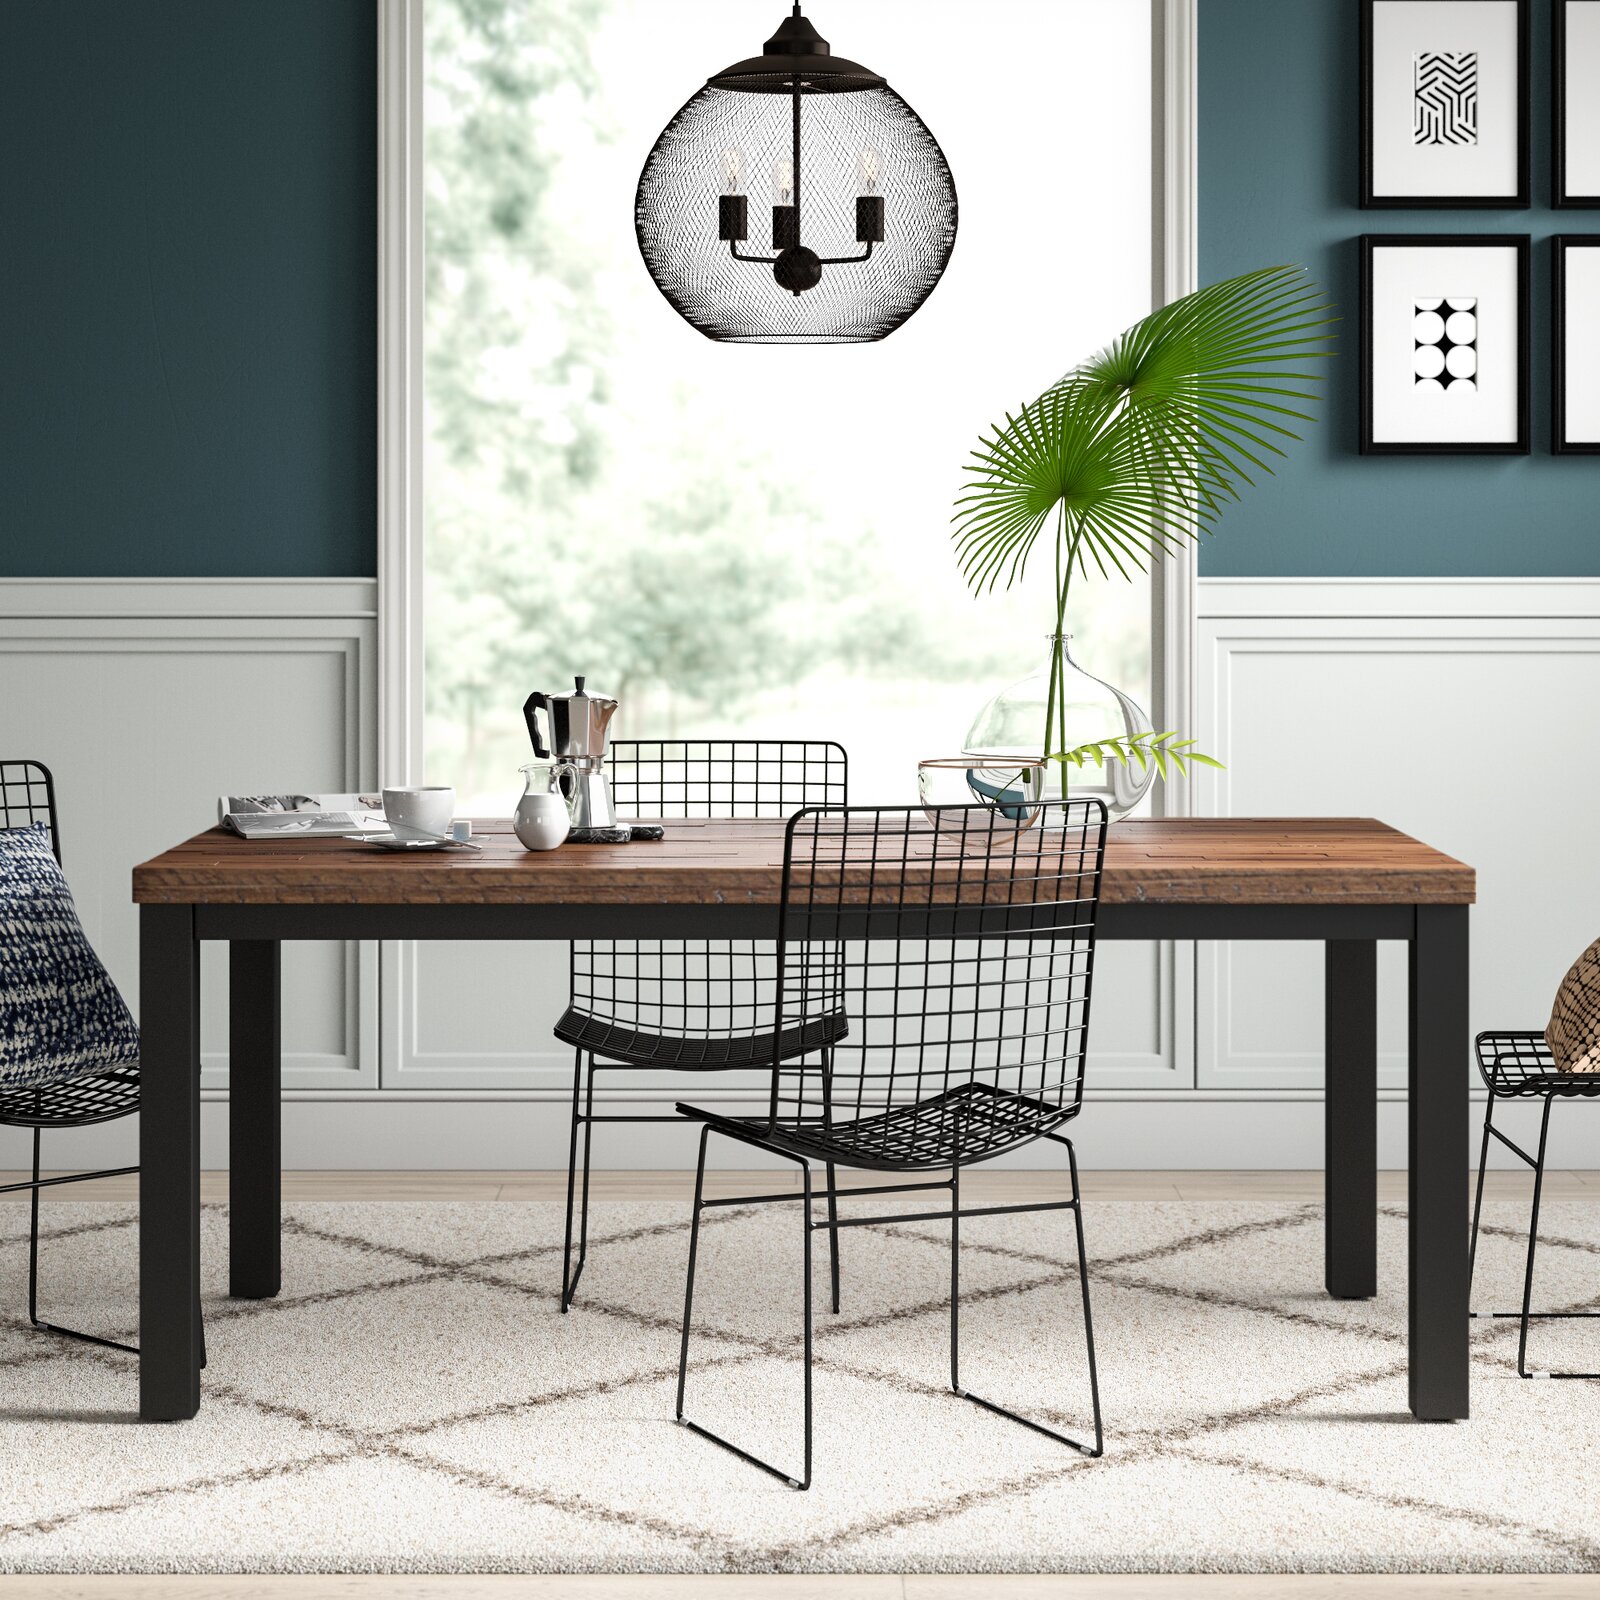 Langley+72%27%27+Dining+Table